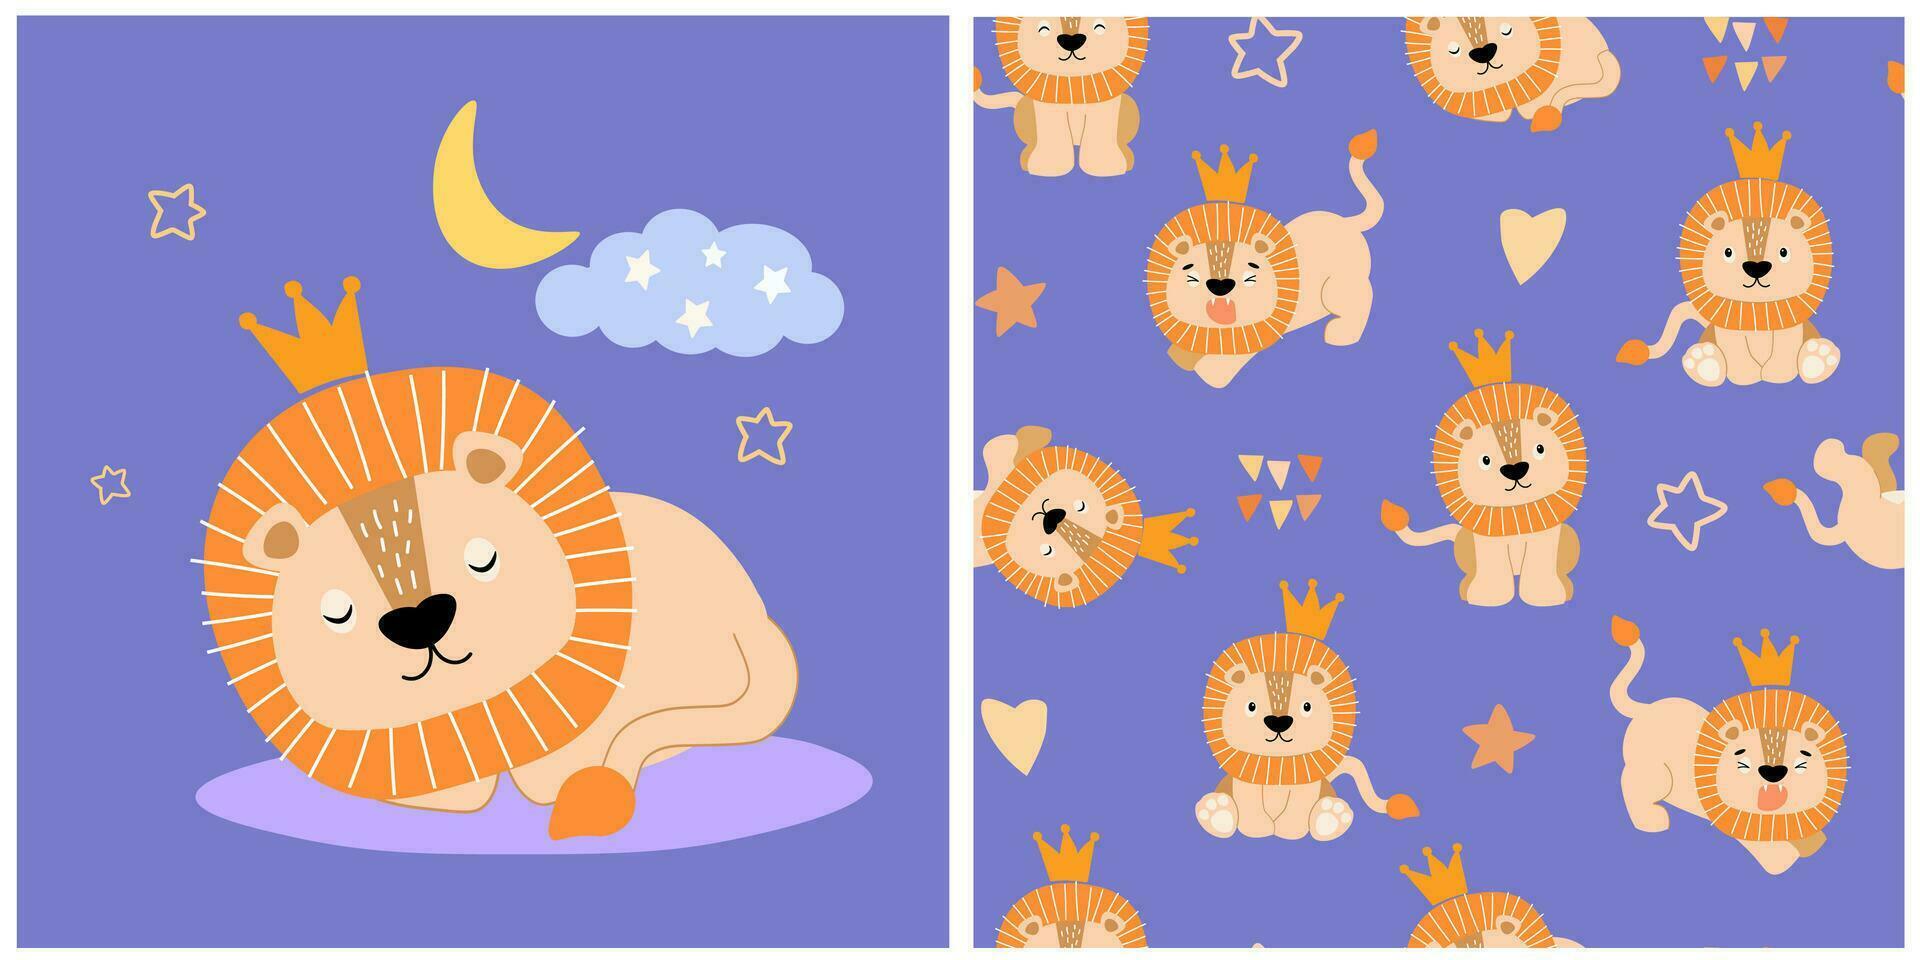 Childish pattern with a cute sleeping lion cub in a crown, seamless pattern. For children's clothing, fabrics, wallpapers, wrapping paper, textiles, T-shirt prints. Hand drawn vector graphics